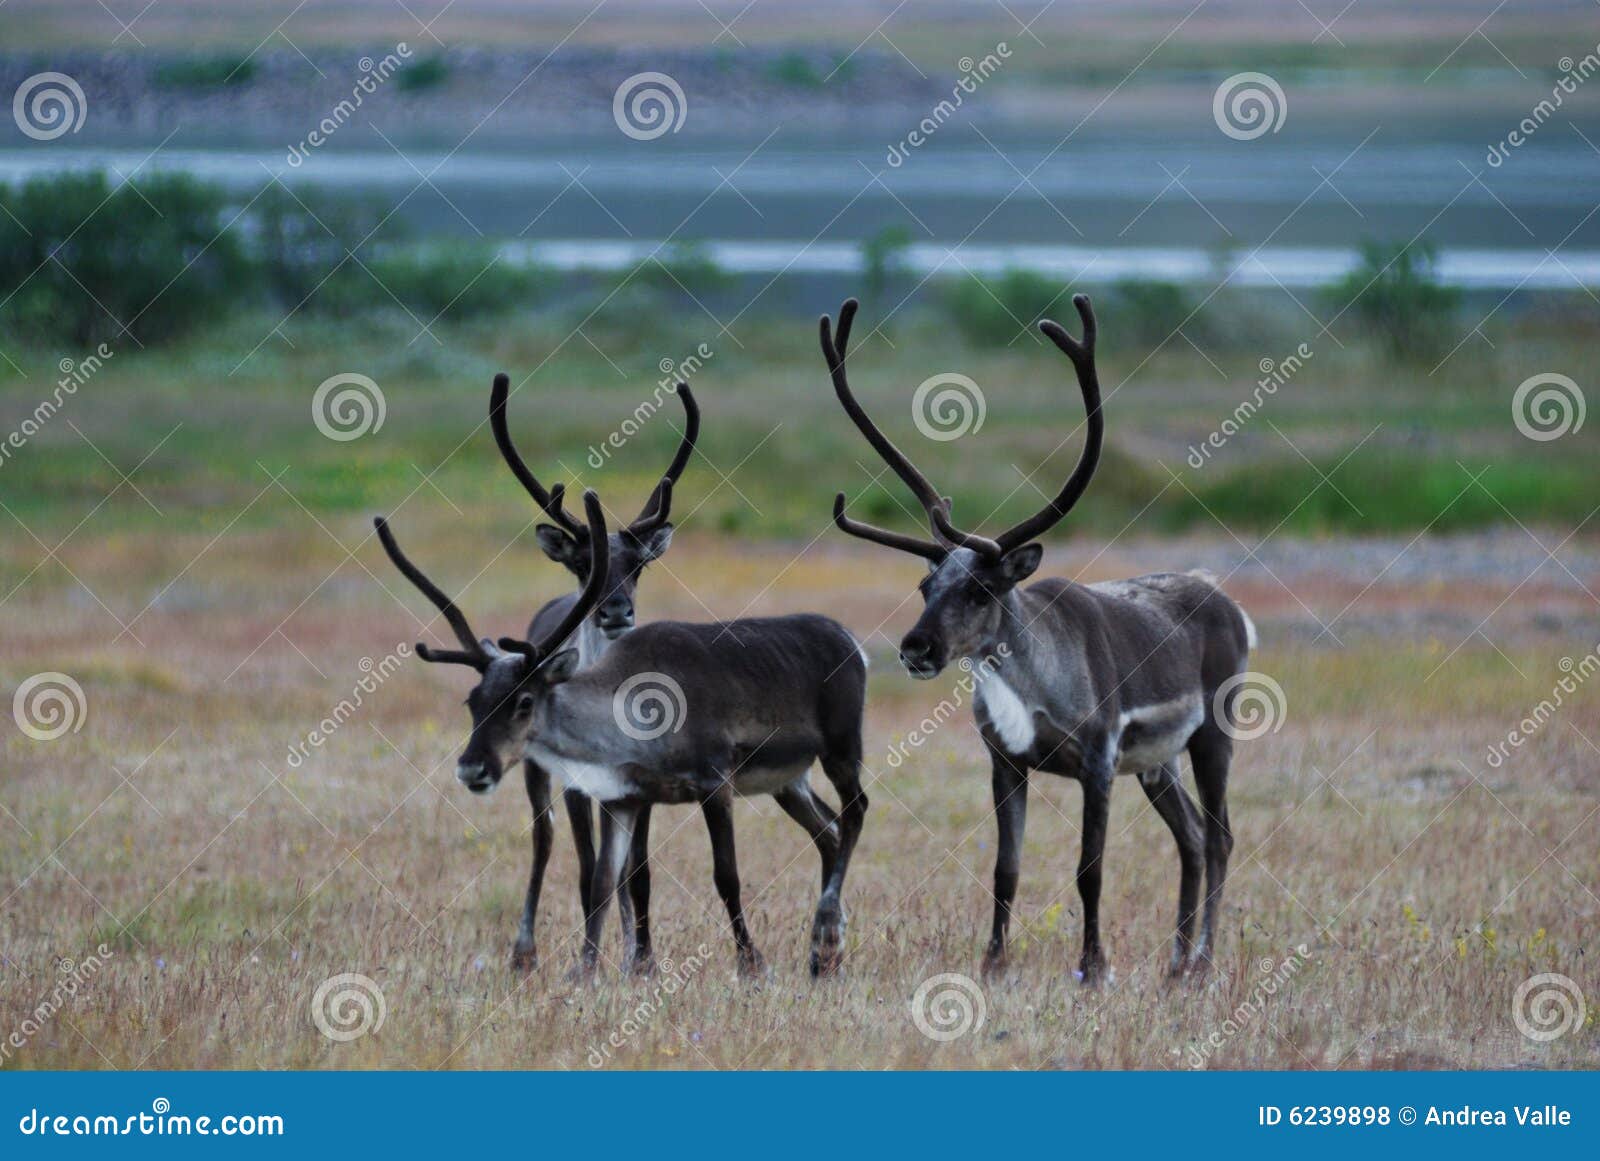 Reindeer In Iceland Royalty Free Stock Photos - Image: 6239898